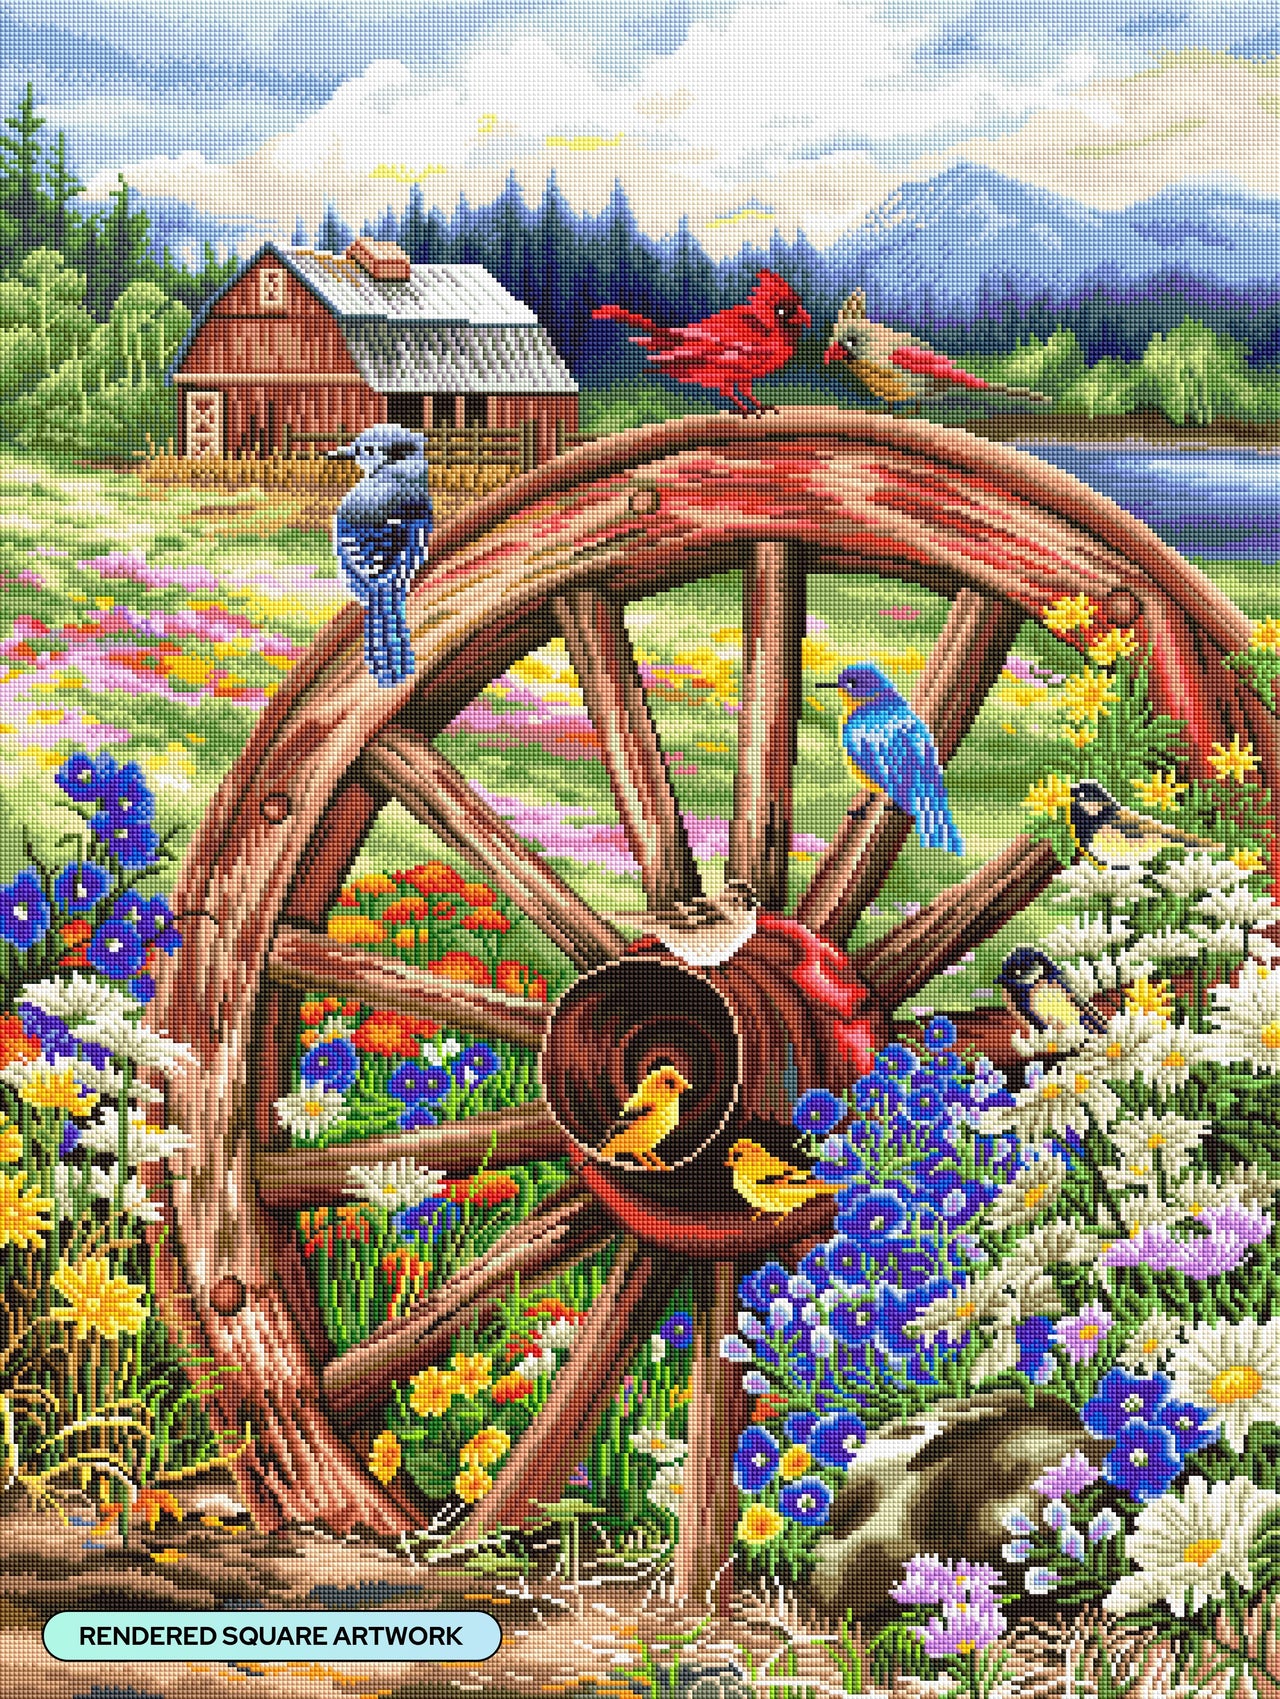 Diamond Painting The Wagon Wheel 27.6" x 36.6" (70cm x 93cm) / Square with 77 Colors including 4 ABs and 1 Fairy Dust Diamonds / 104,813